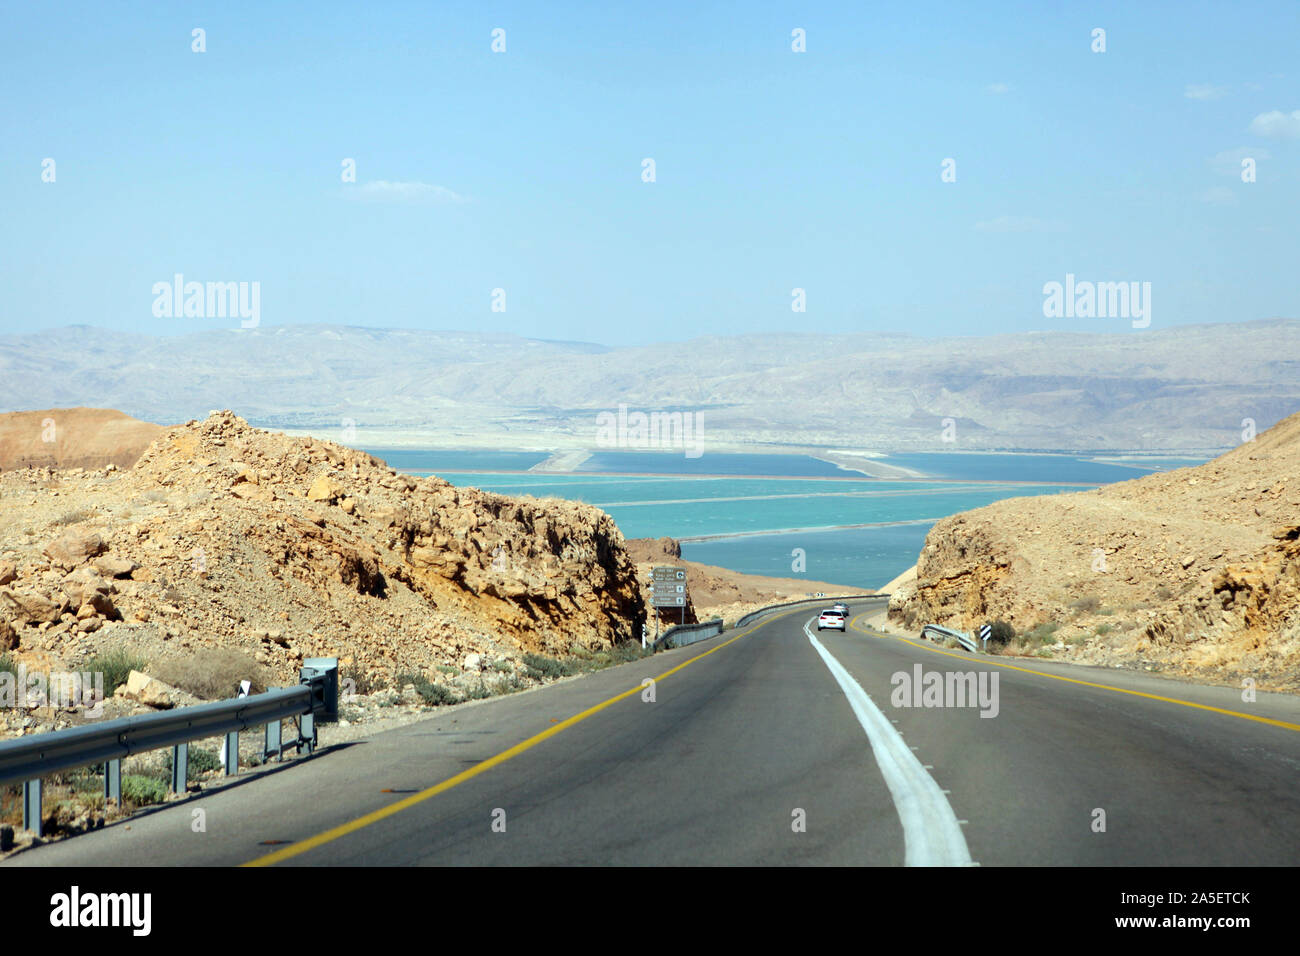 Deadseaview on a curvy sandy road on a highway that runs along the Dead Sea from one side and Edom Mountains at Arava Desert from the other in Israel. Stock Photo